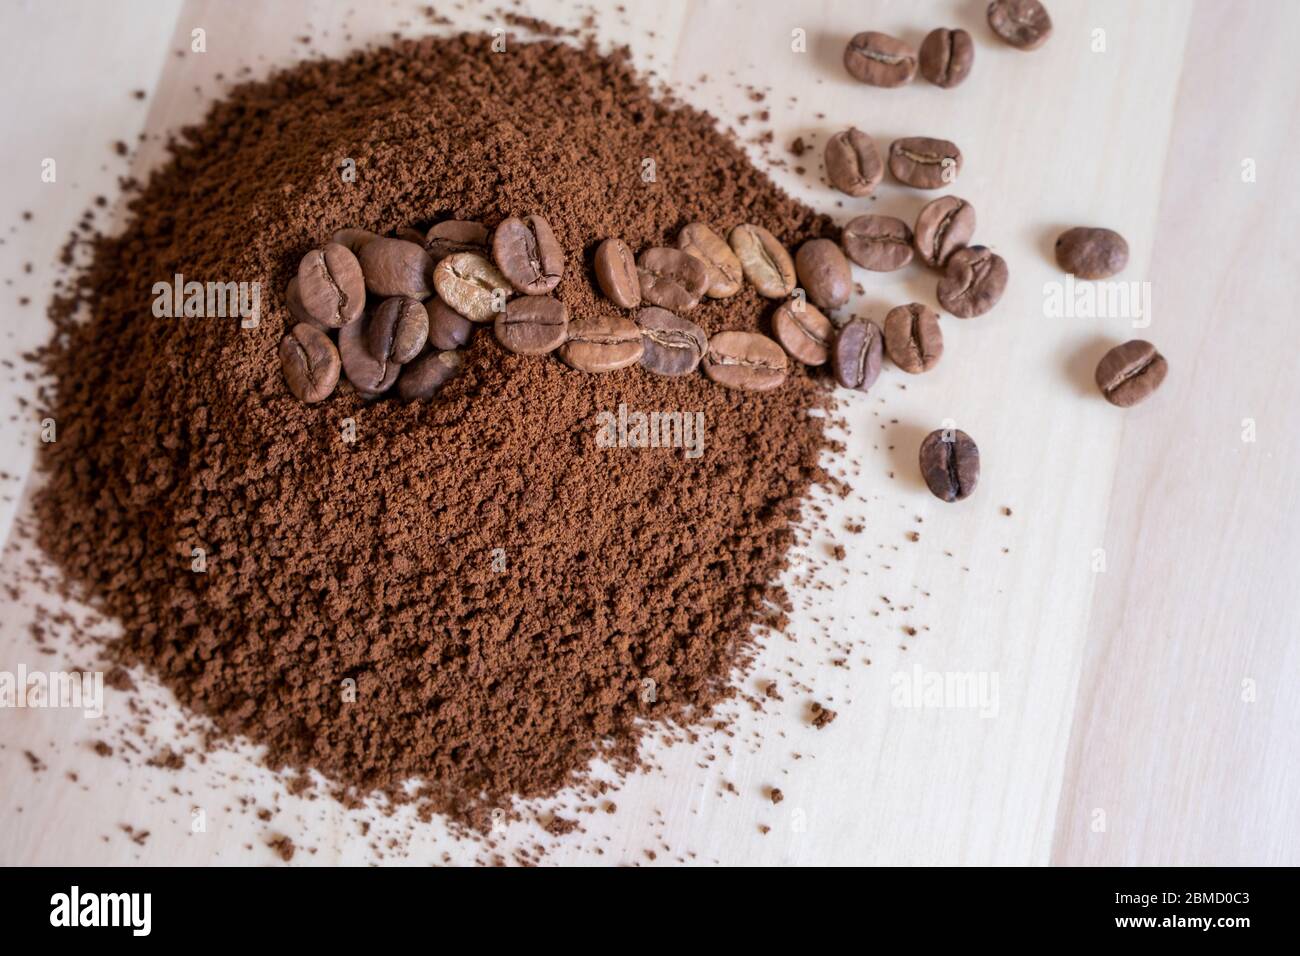 Top view of coffee beans and ground coffee on wooden background, roasted coffee volcano like anthill Stock Photo